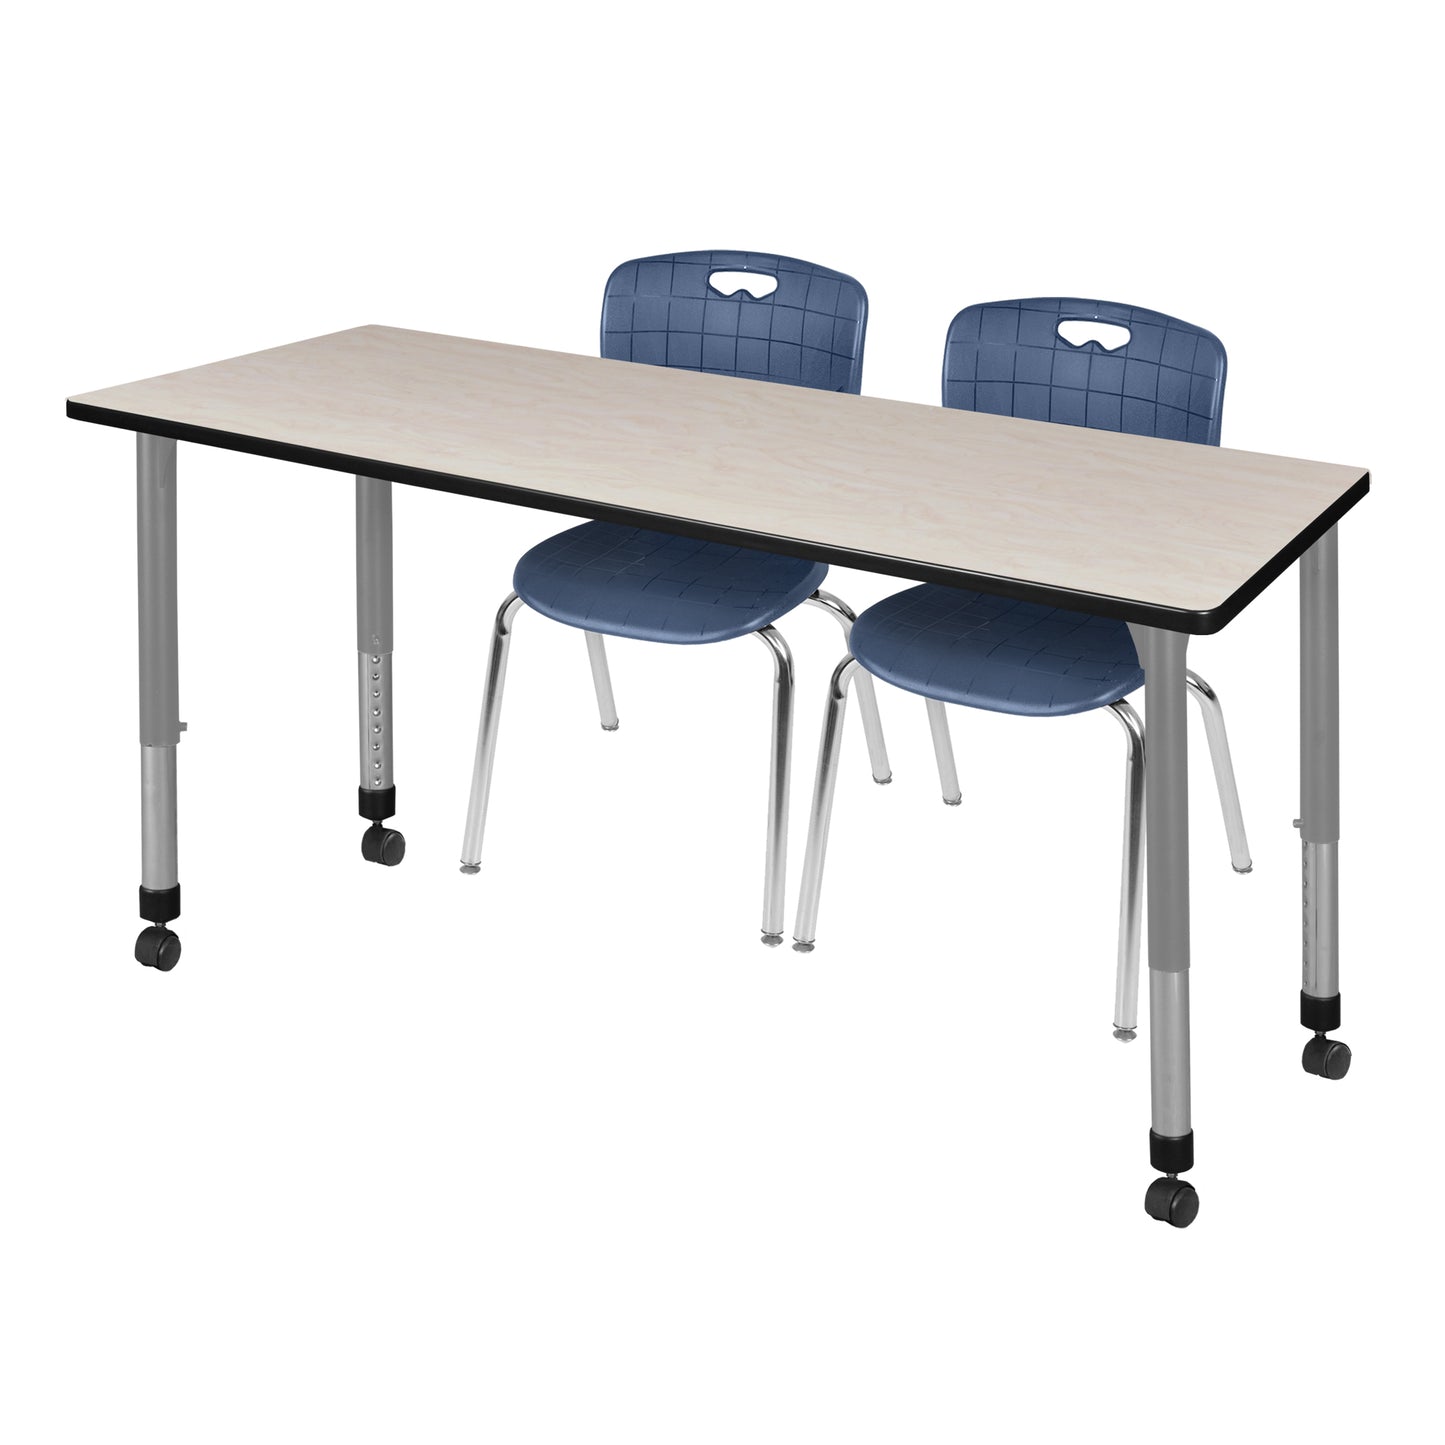 Regency Kee 60 x 30 in. Adjustable Classroom Table & 2 Andy 18 in. Stack Chairs